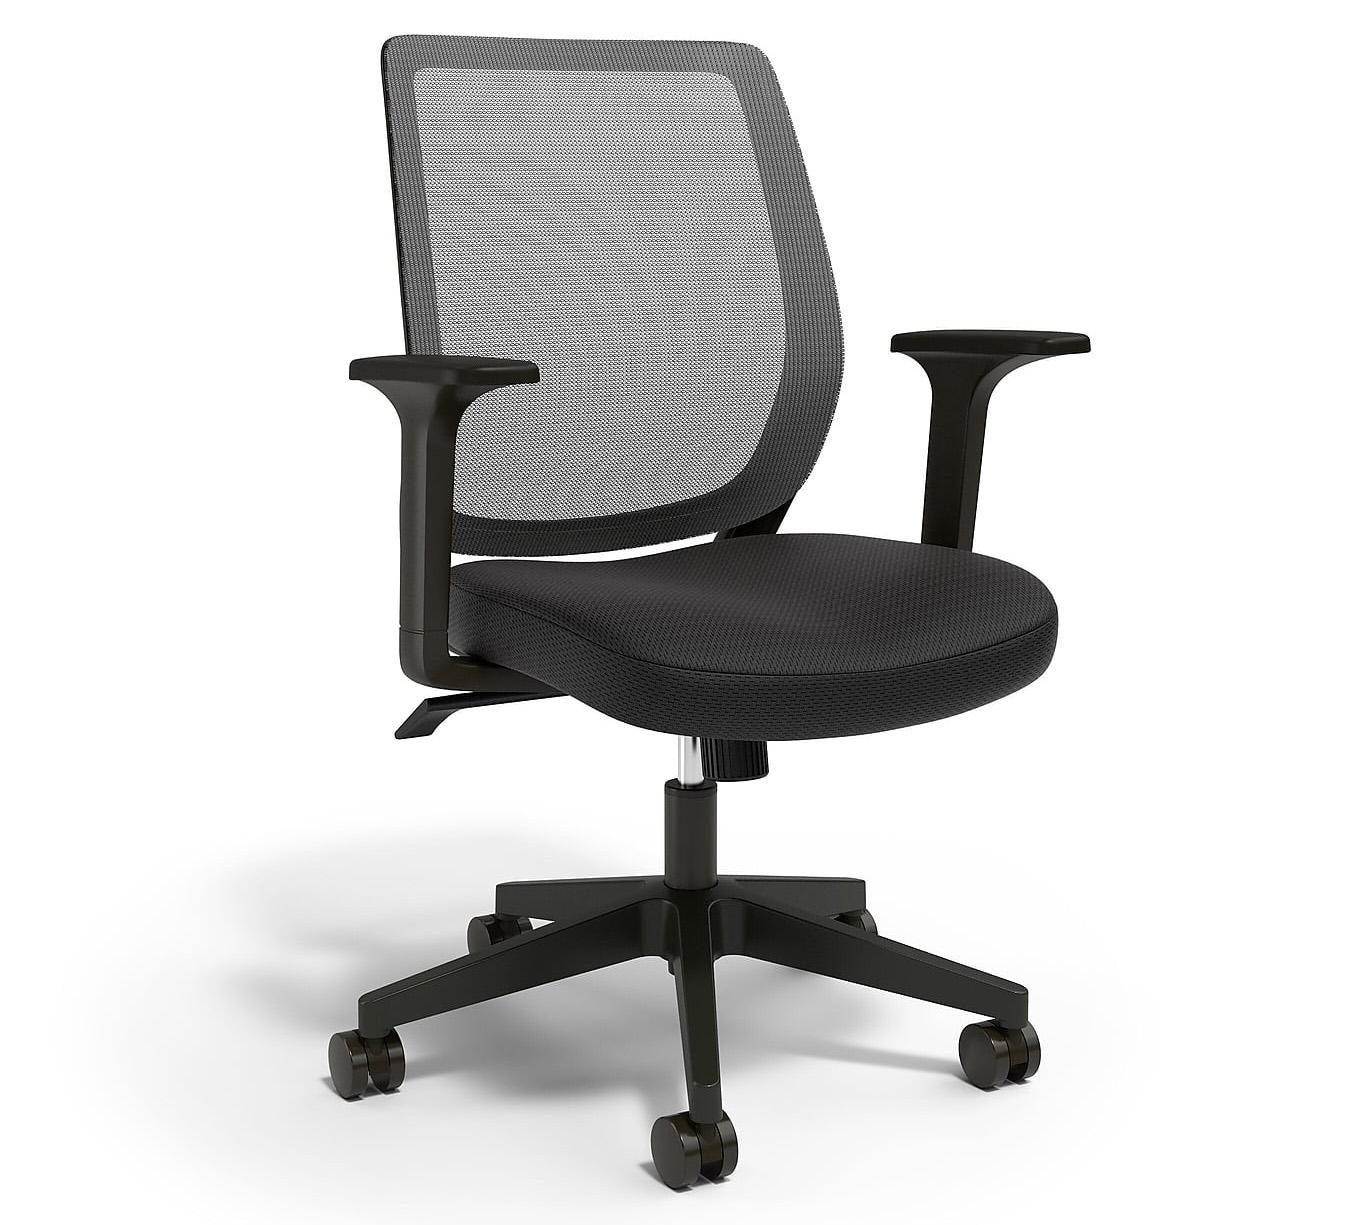 Union and Scale Essentials Ergonomic Fabric Swivel Task Chair for $59.99